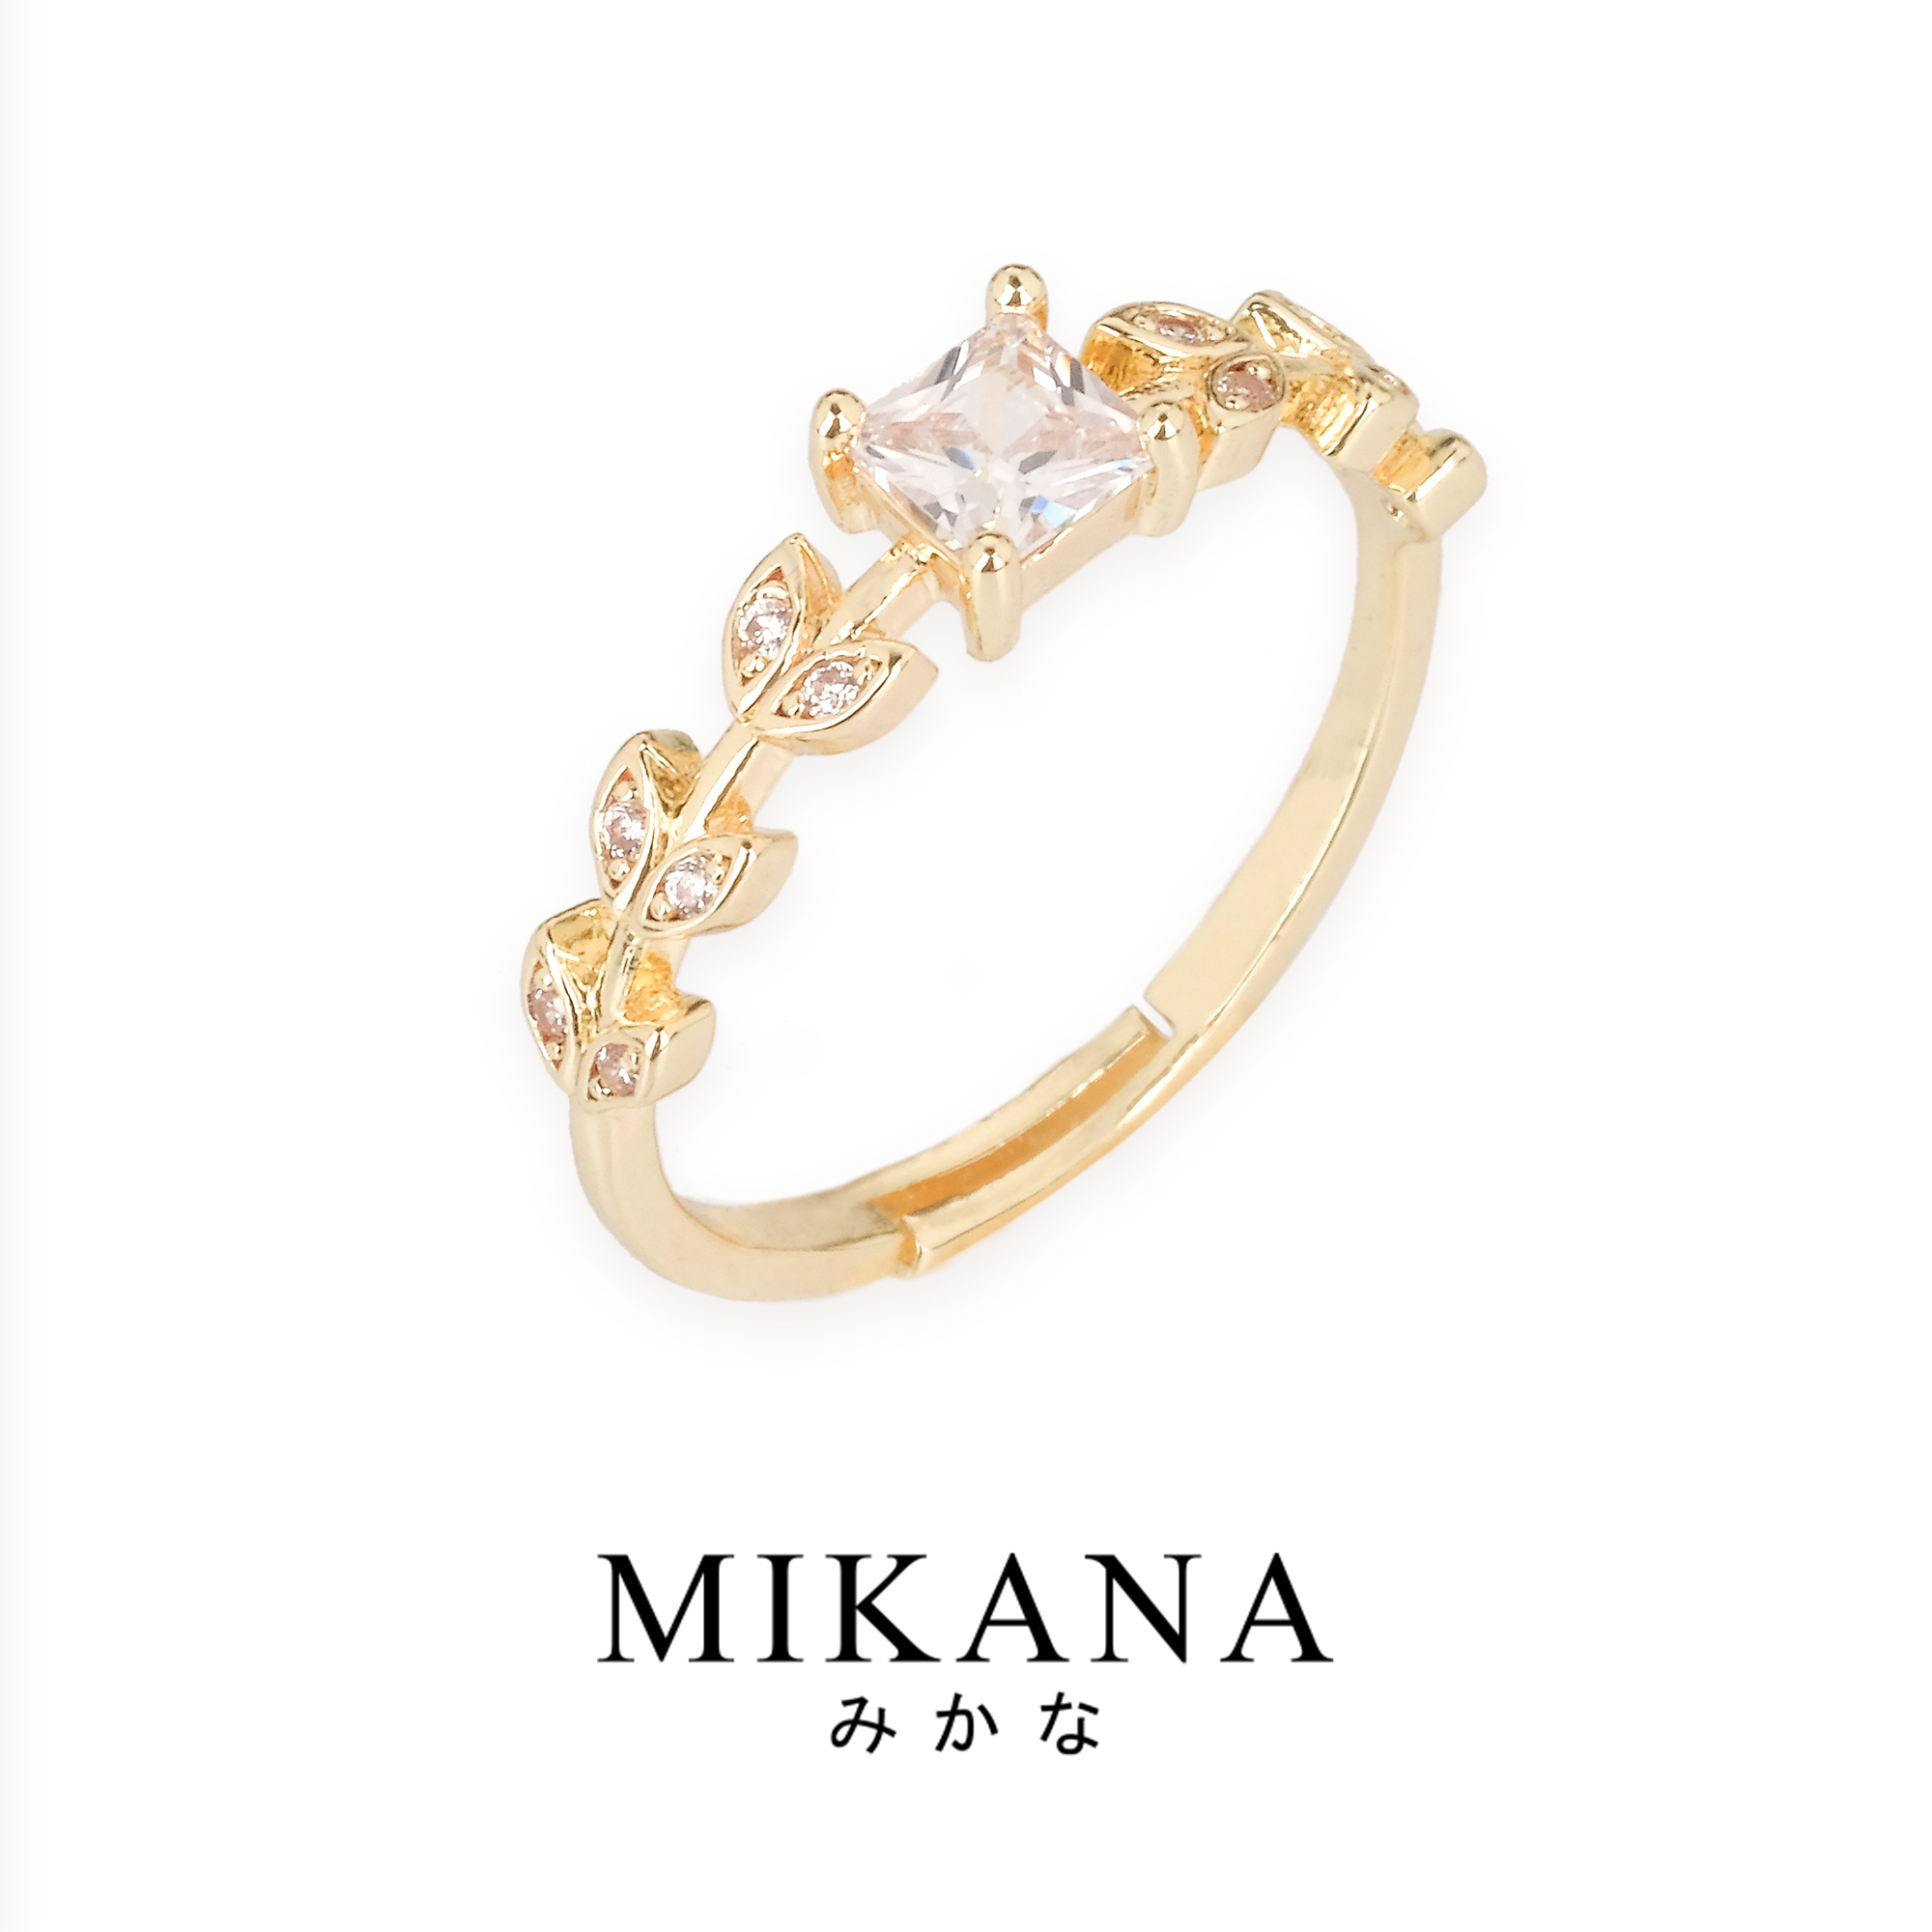 Shop Gold Stainless Ring Fashion Diamond Ring For Women with great